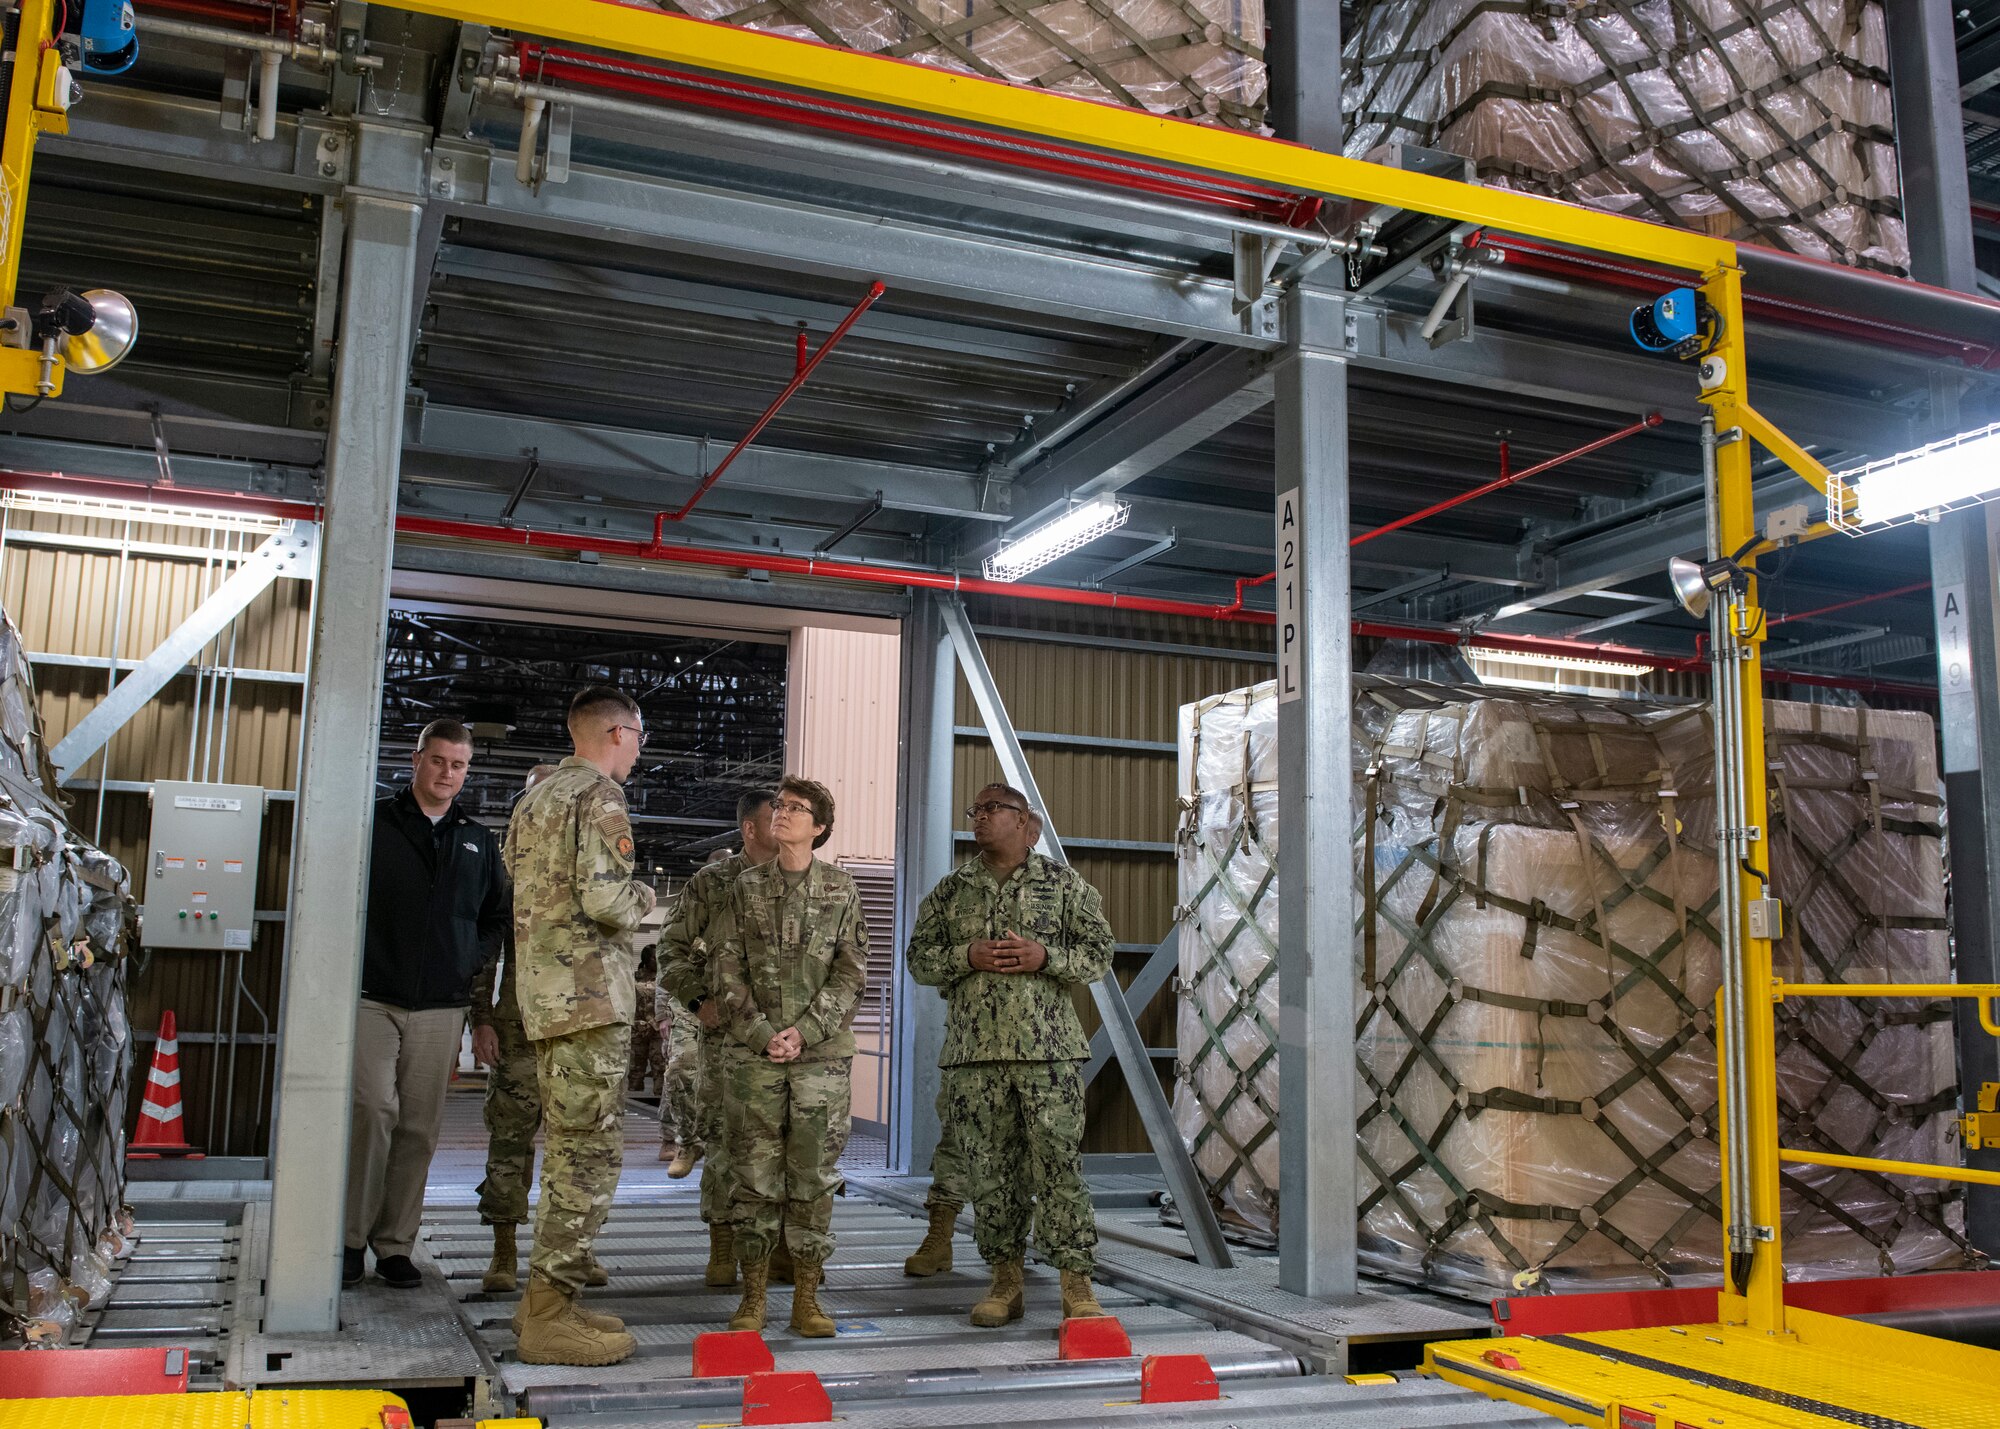 A female general standing in a large entry way to a large air freight storage area